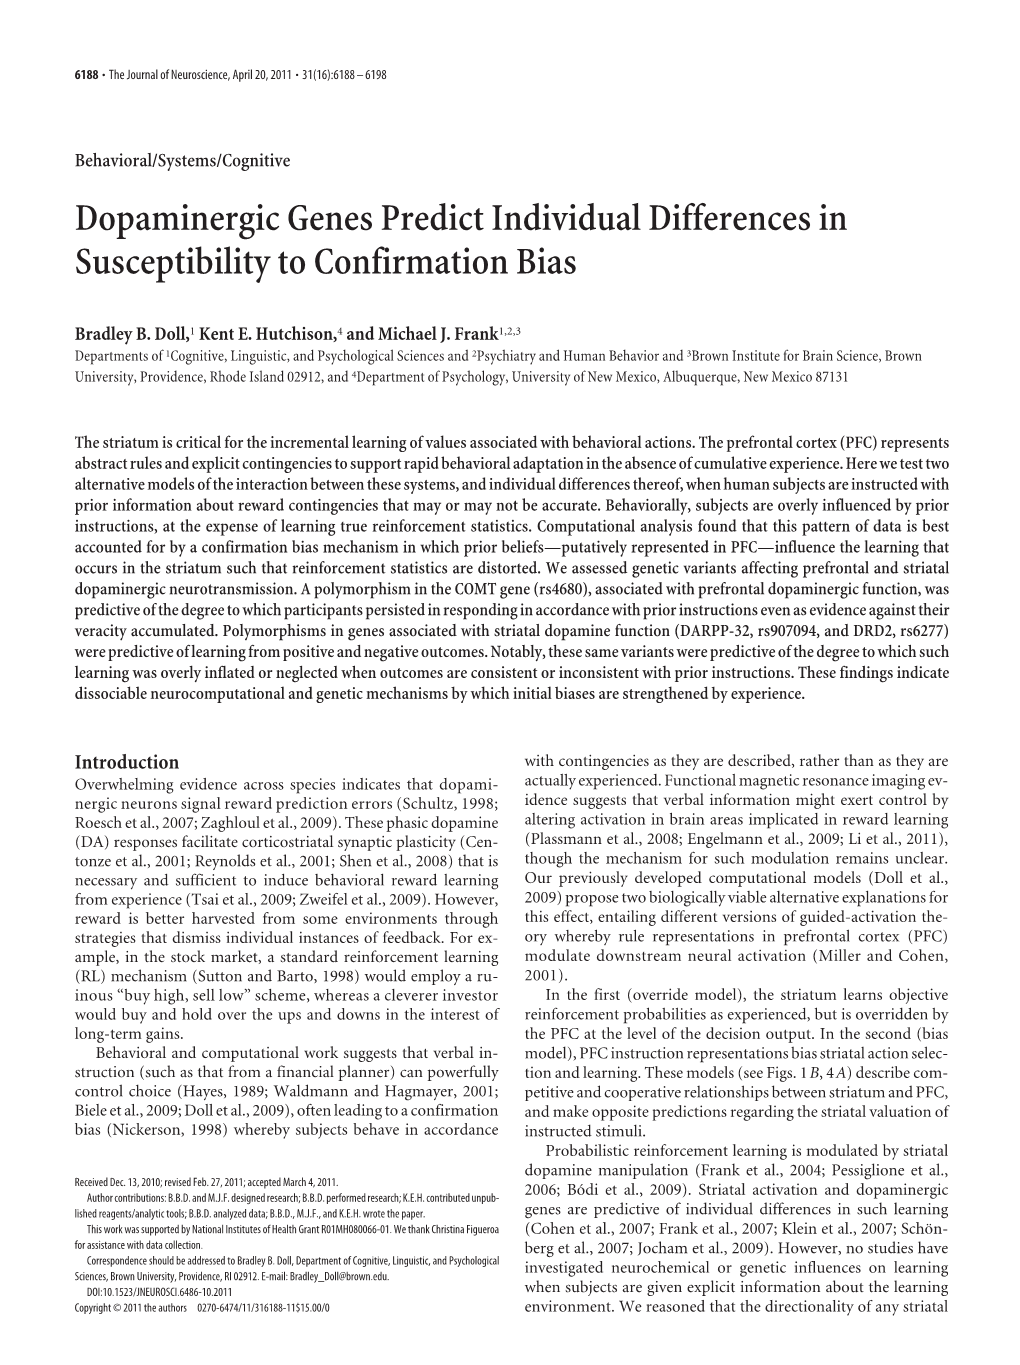 Dopaminergic Genes Predict Individual Differences in Susceptibility to Confirmation Bias